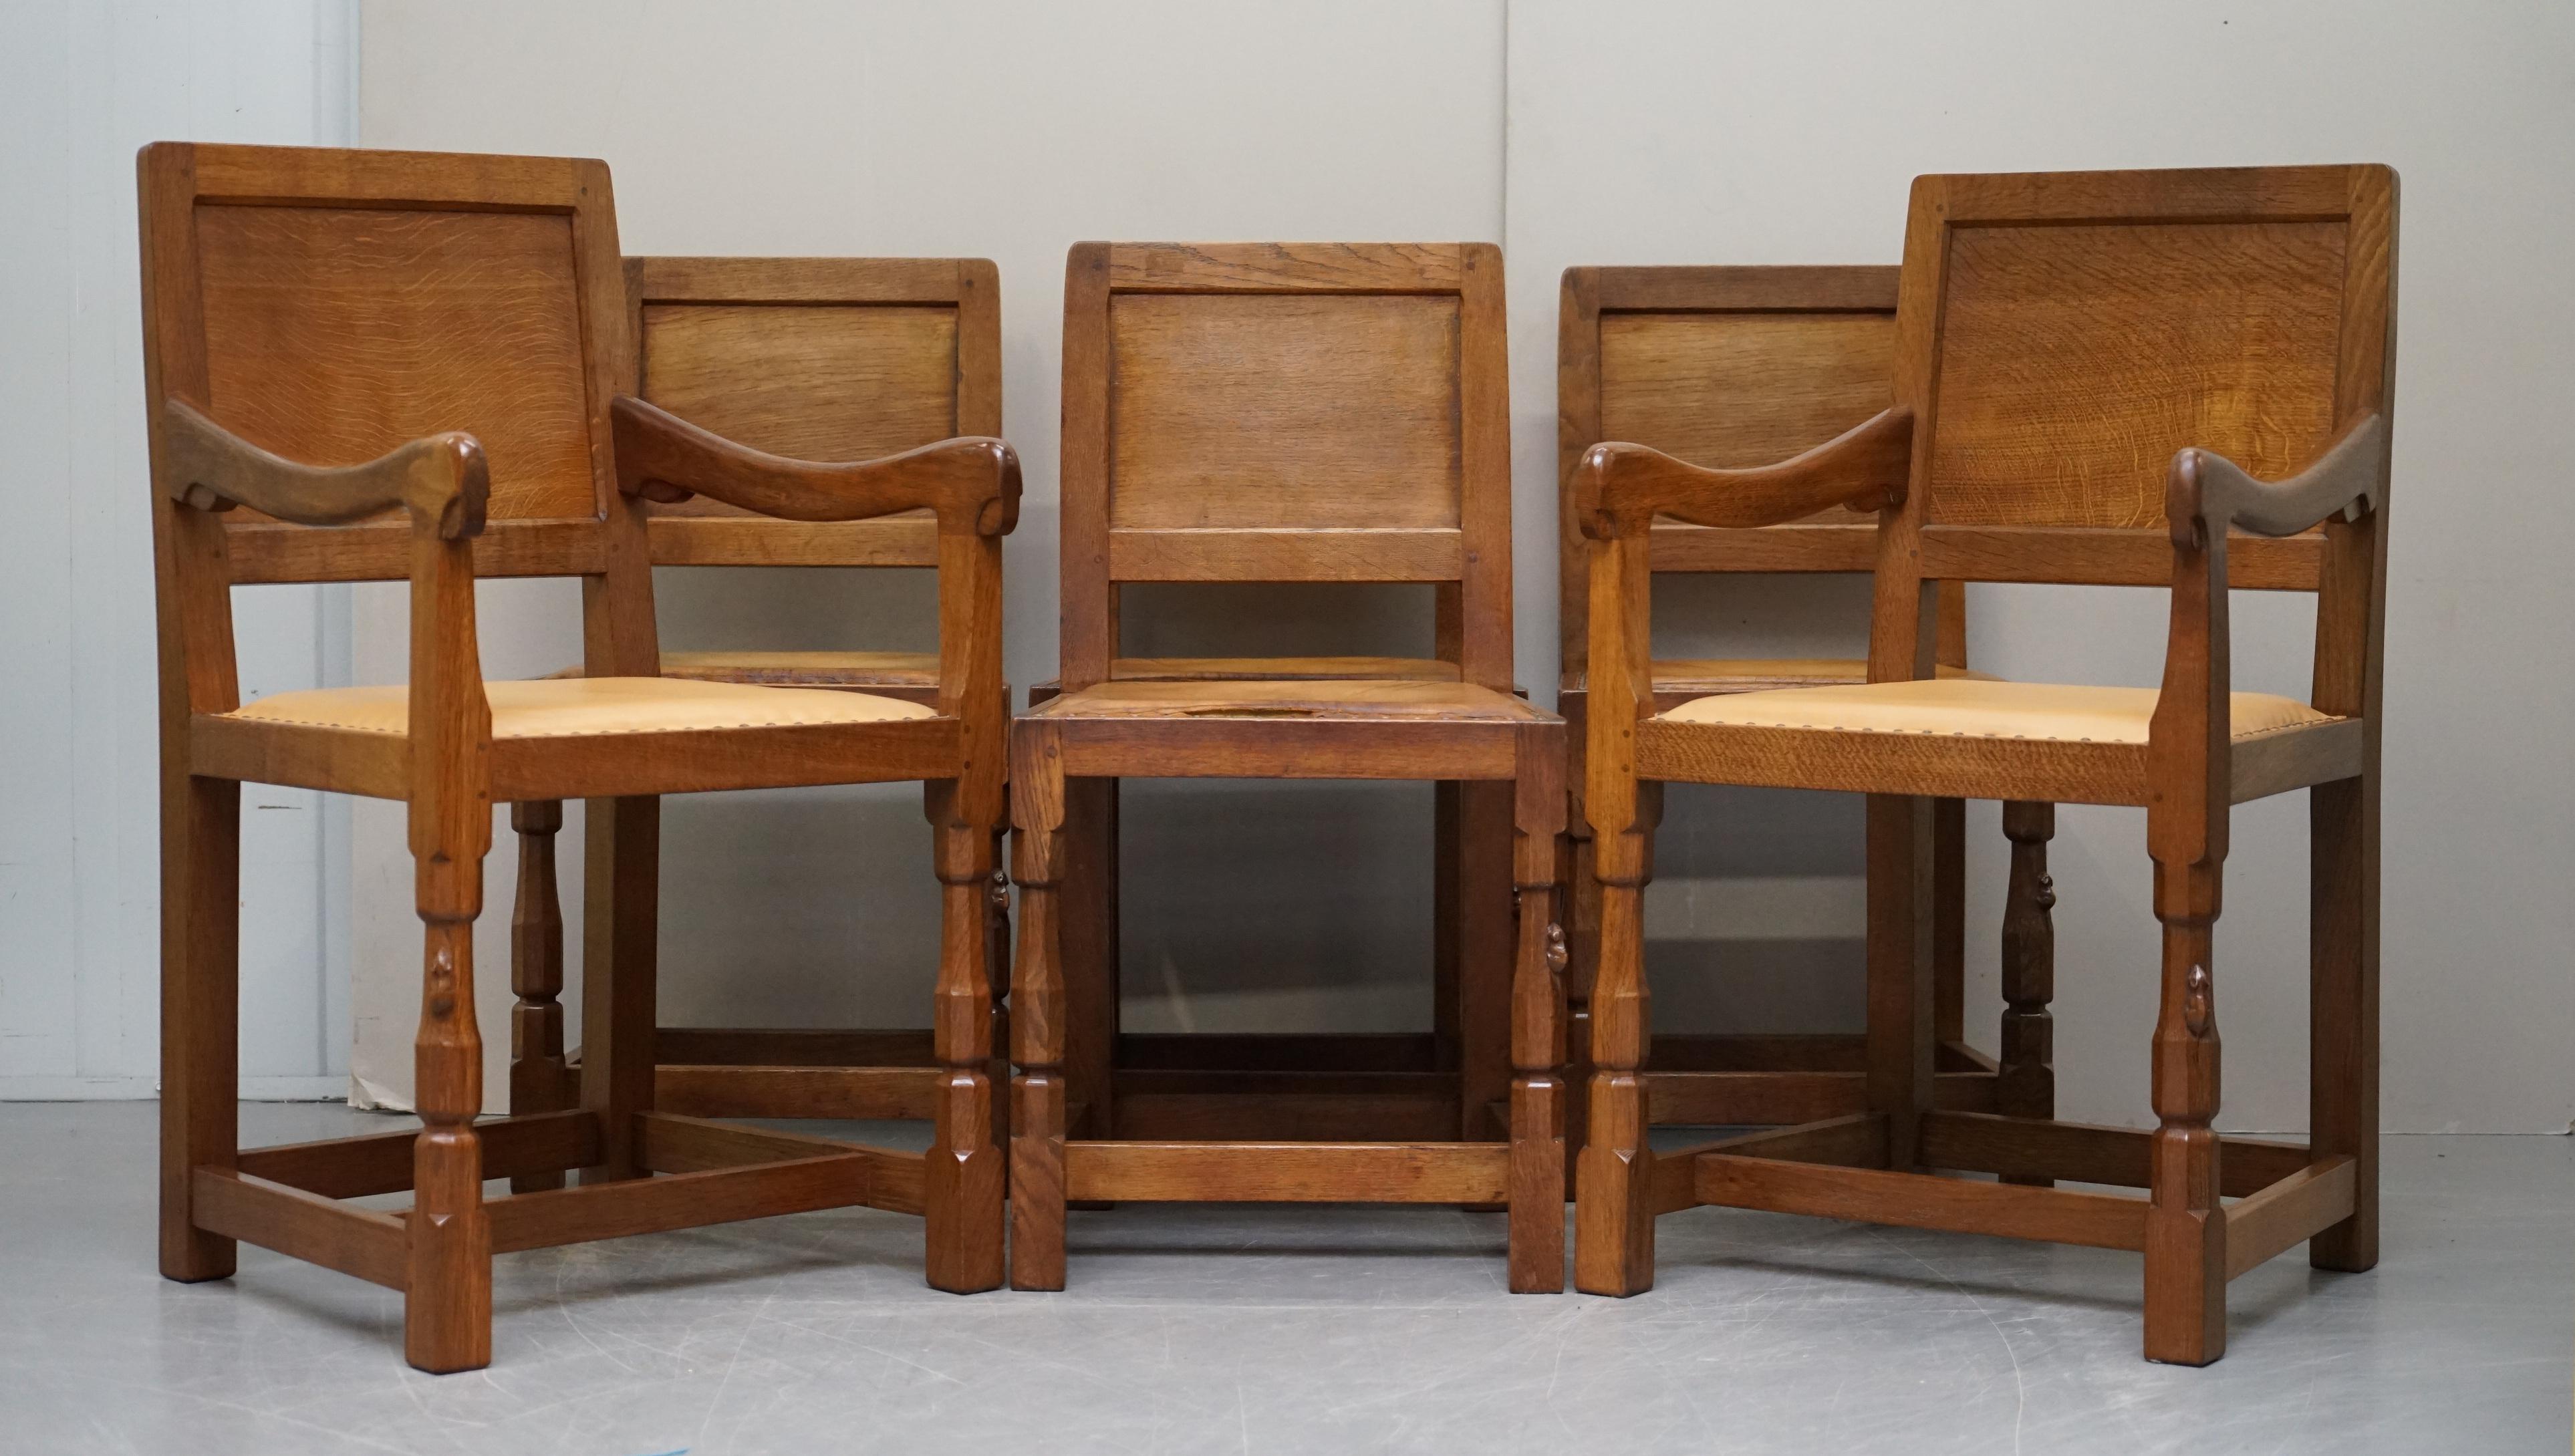 We are delighted to offer for sale this very rare set of six honeycomb oak 1950s Robert Mouseman Thompson dining chairs in restored condition

These chairs have been lightly restored, the frames have been cleaned waxed and polished, checked for